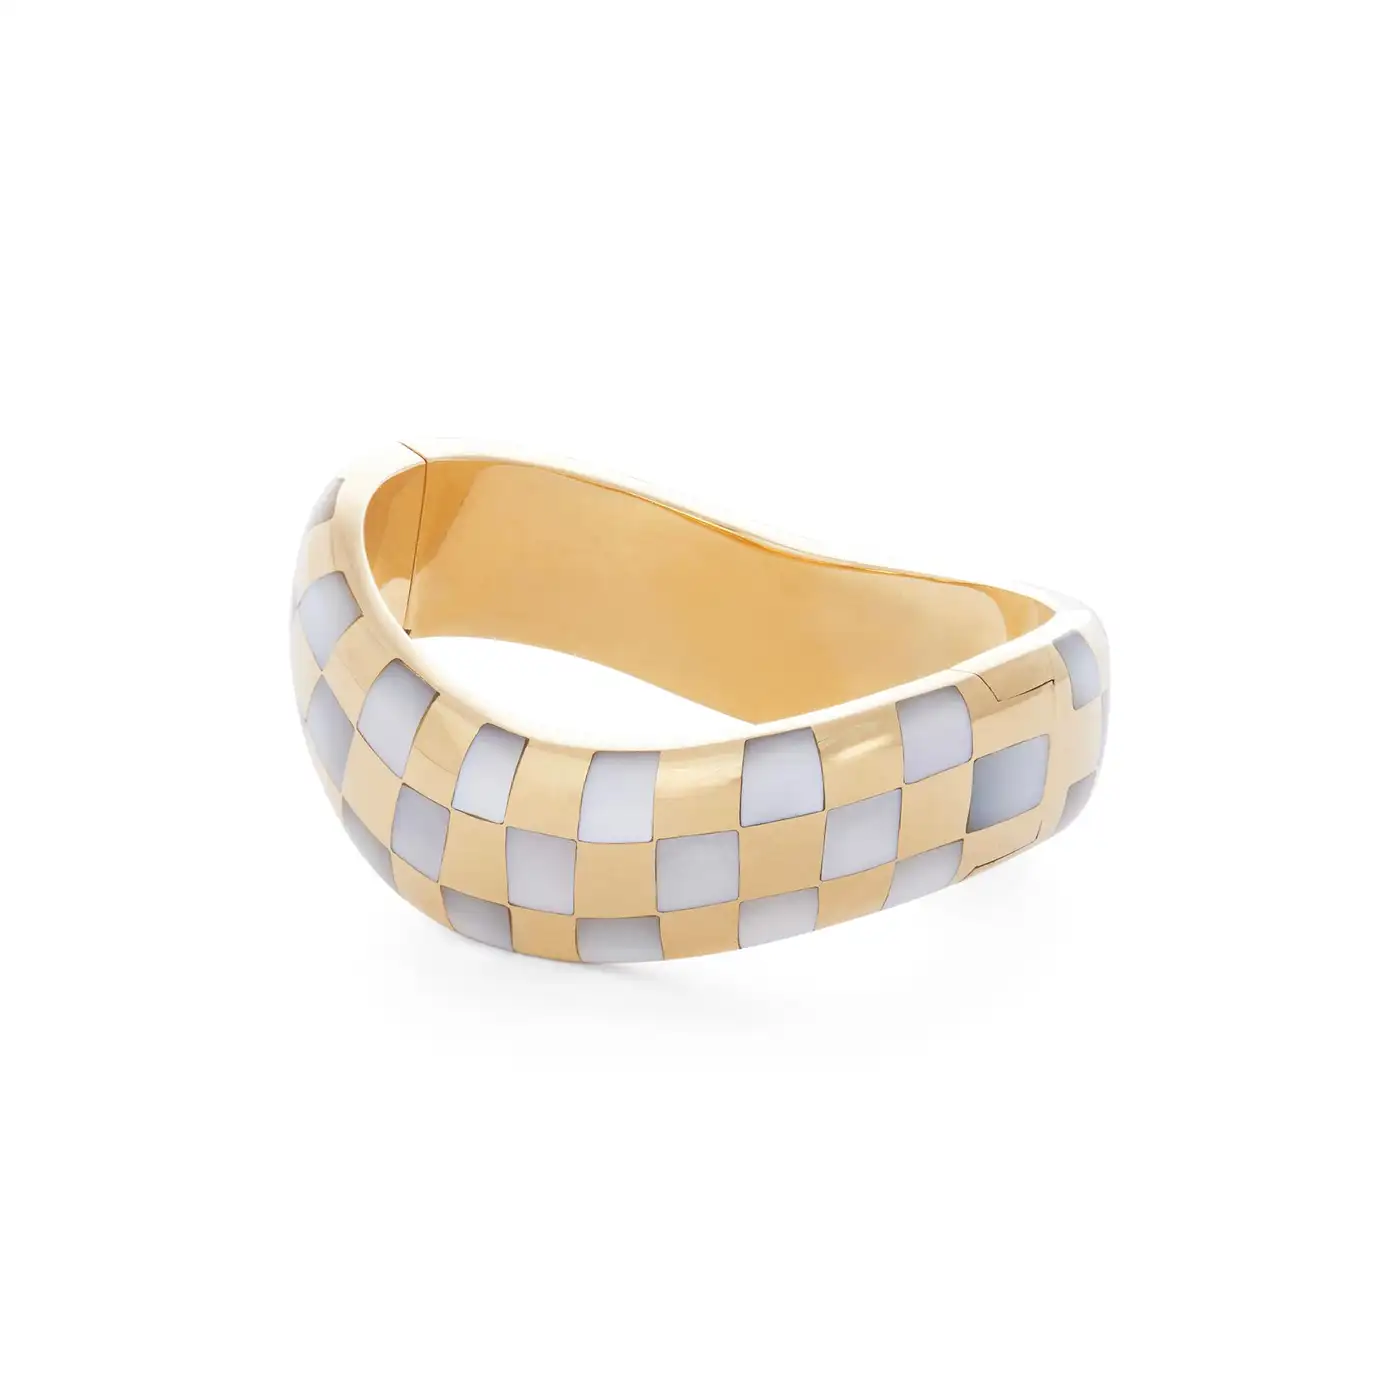 Angela-Cummings-Gold-and-Mother-or-Pearl-Bangle-6.webp